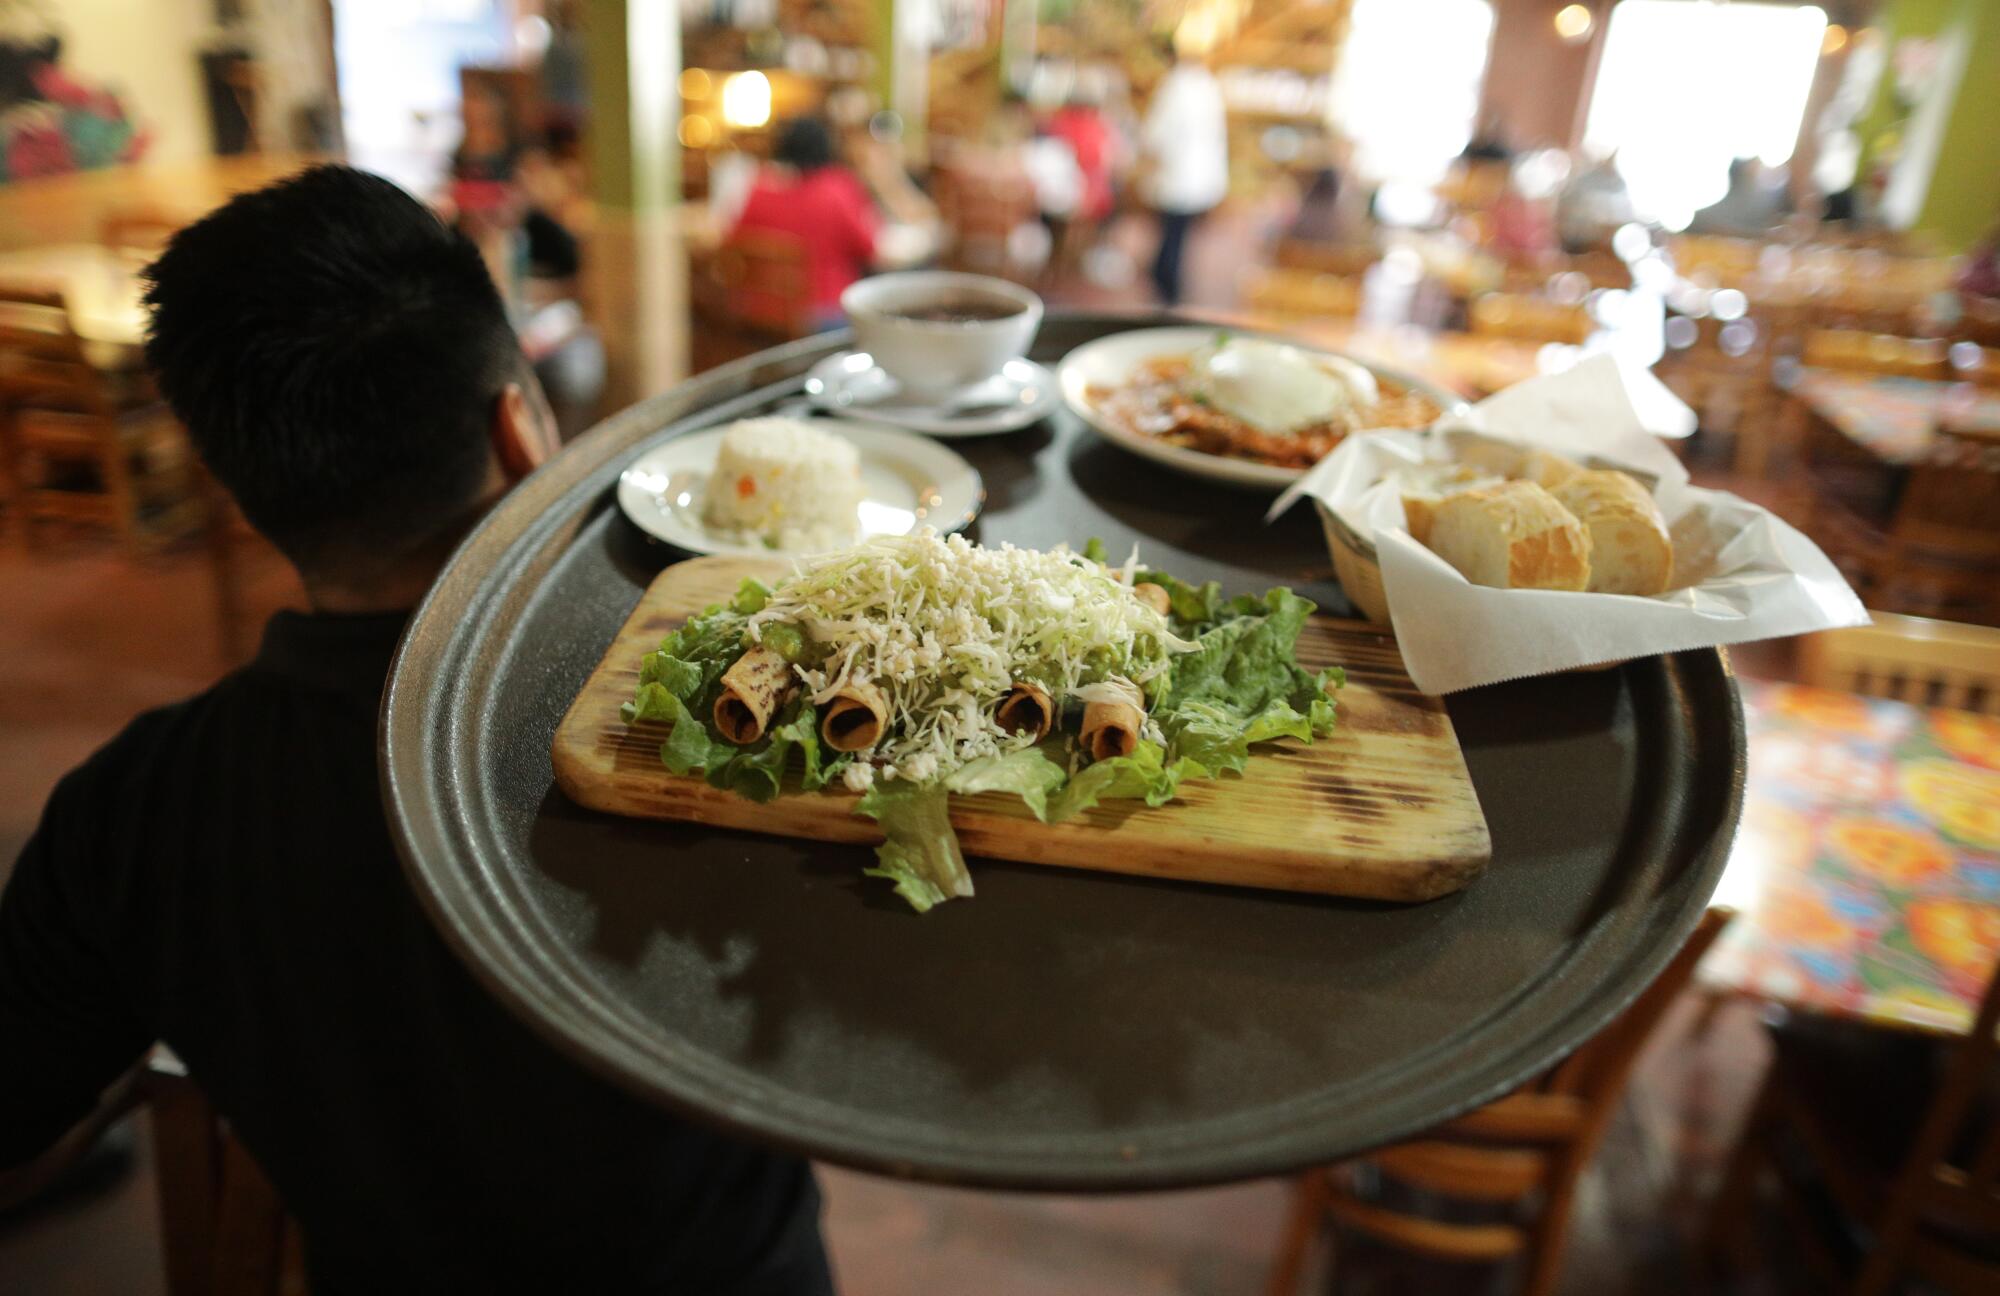 An overhead view of food on a waiter's tray as he walks away from the camera.